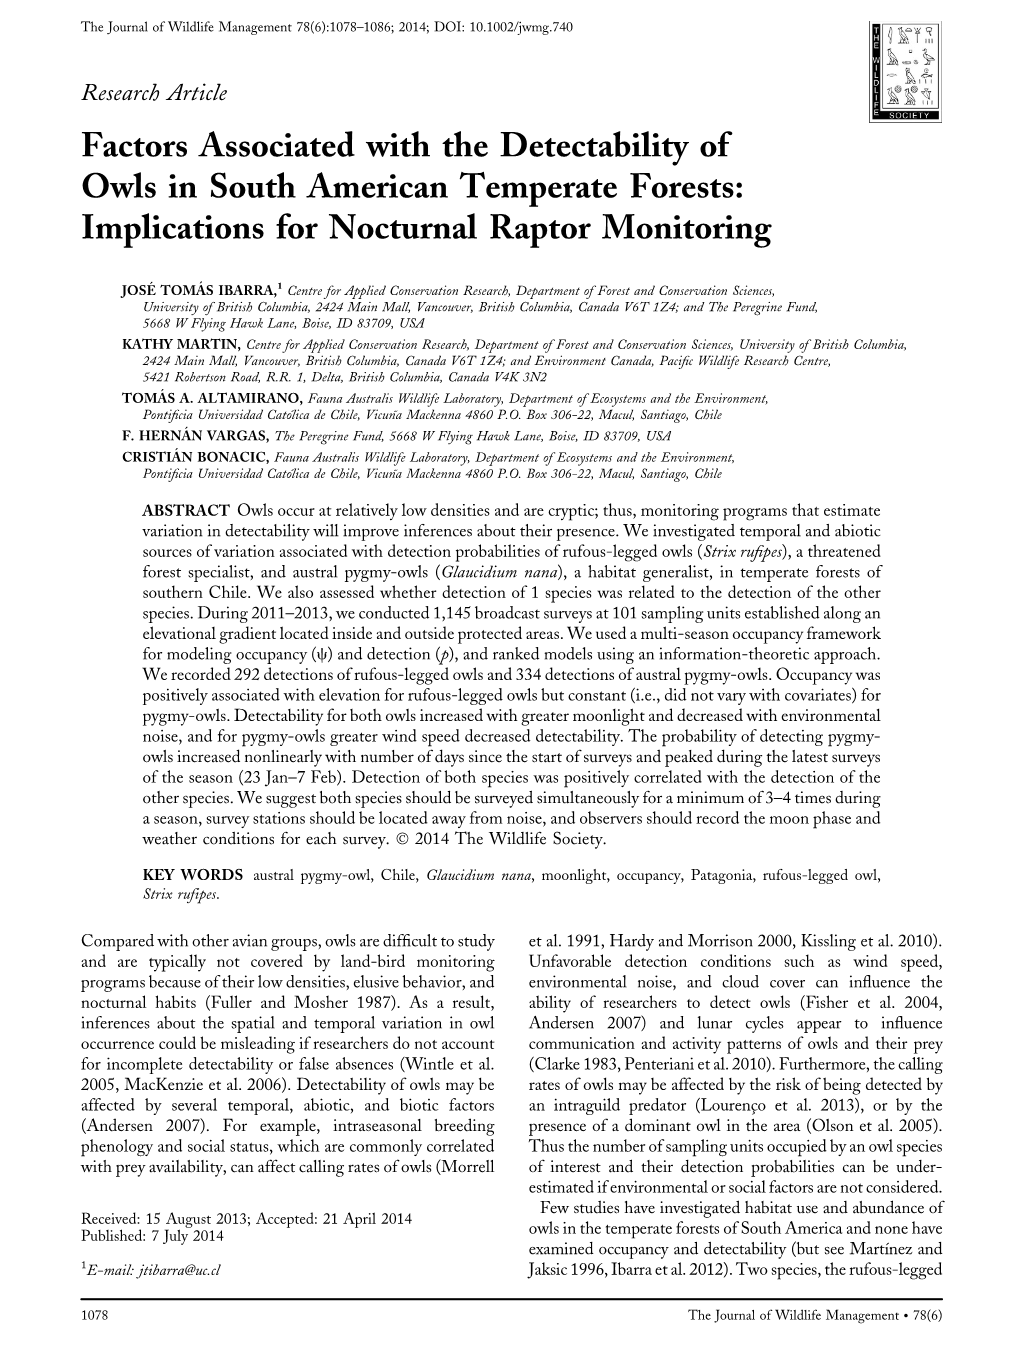 Factors Associated with the Detectability of Owls in South American Temperate Forests: Implications for Nocturnal Raptor Monitoring